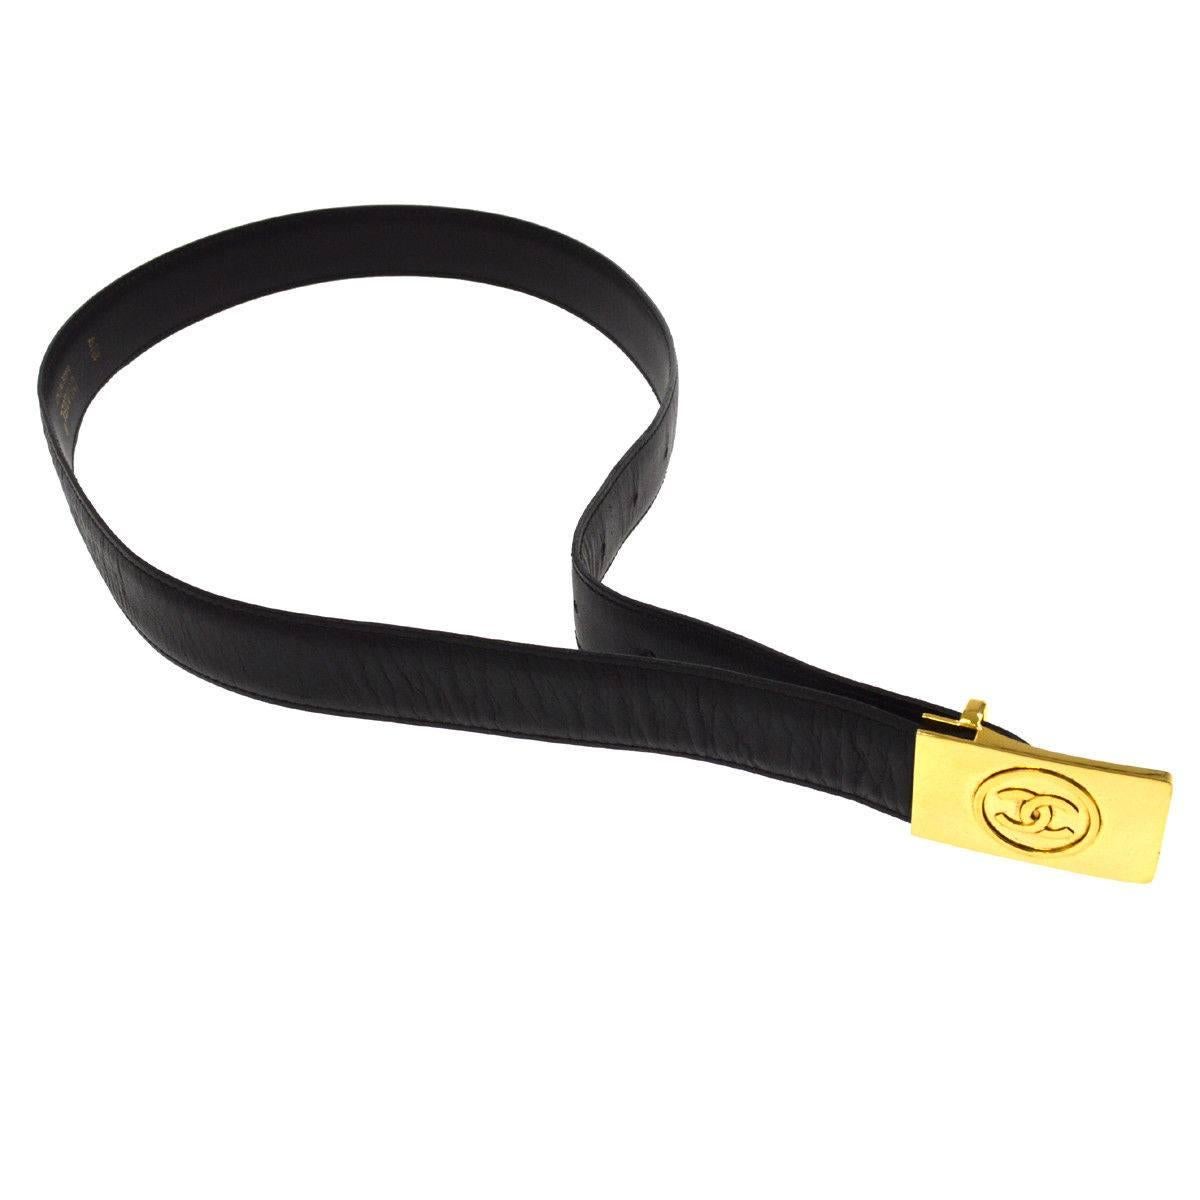 Chanel Black Leather Gold Buckle Charm Evening Waist Belt in Box

Size listed 105/42
Leather
Metal
Gold tone hardware
Made in Italy
Buckle measures 2" W x 1.25" H
Total length 34.5"
Includes original Chanel box